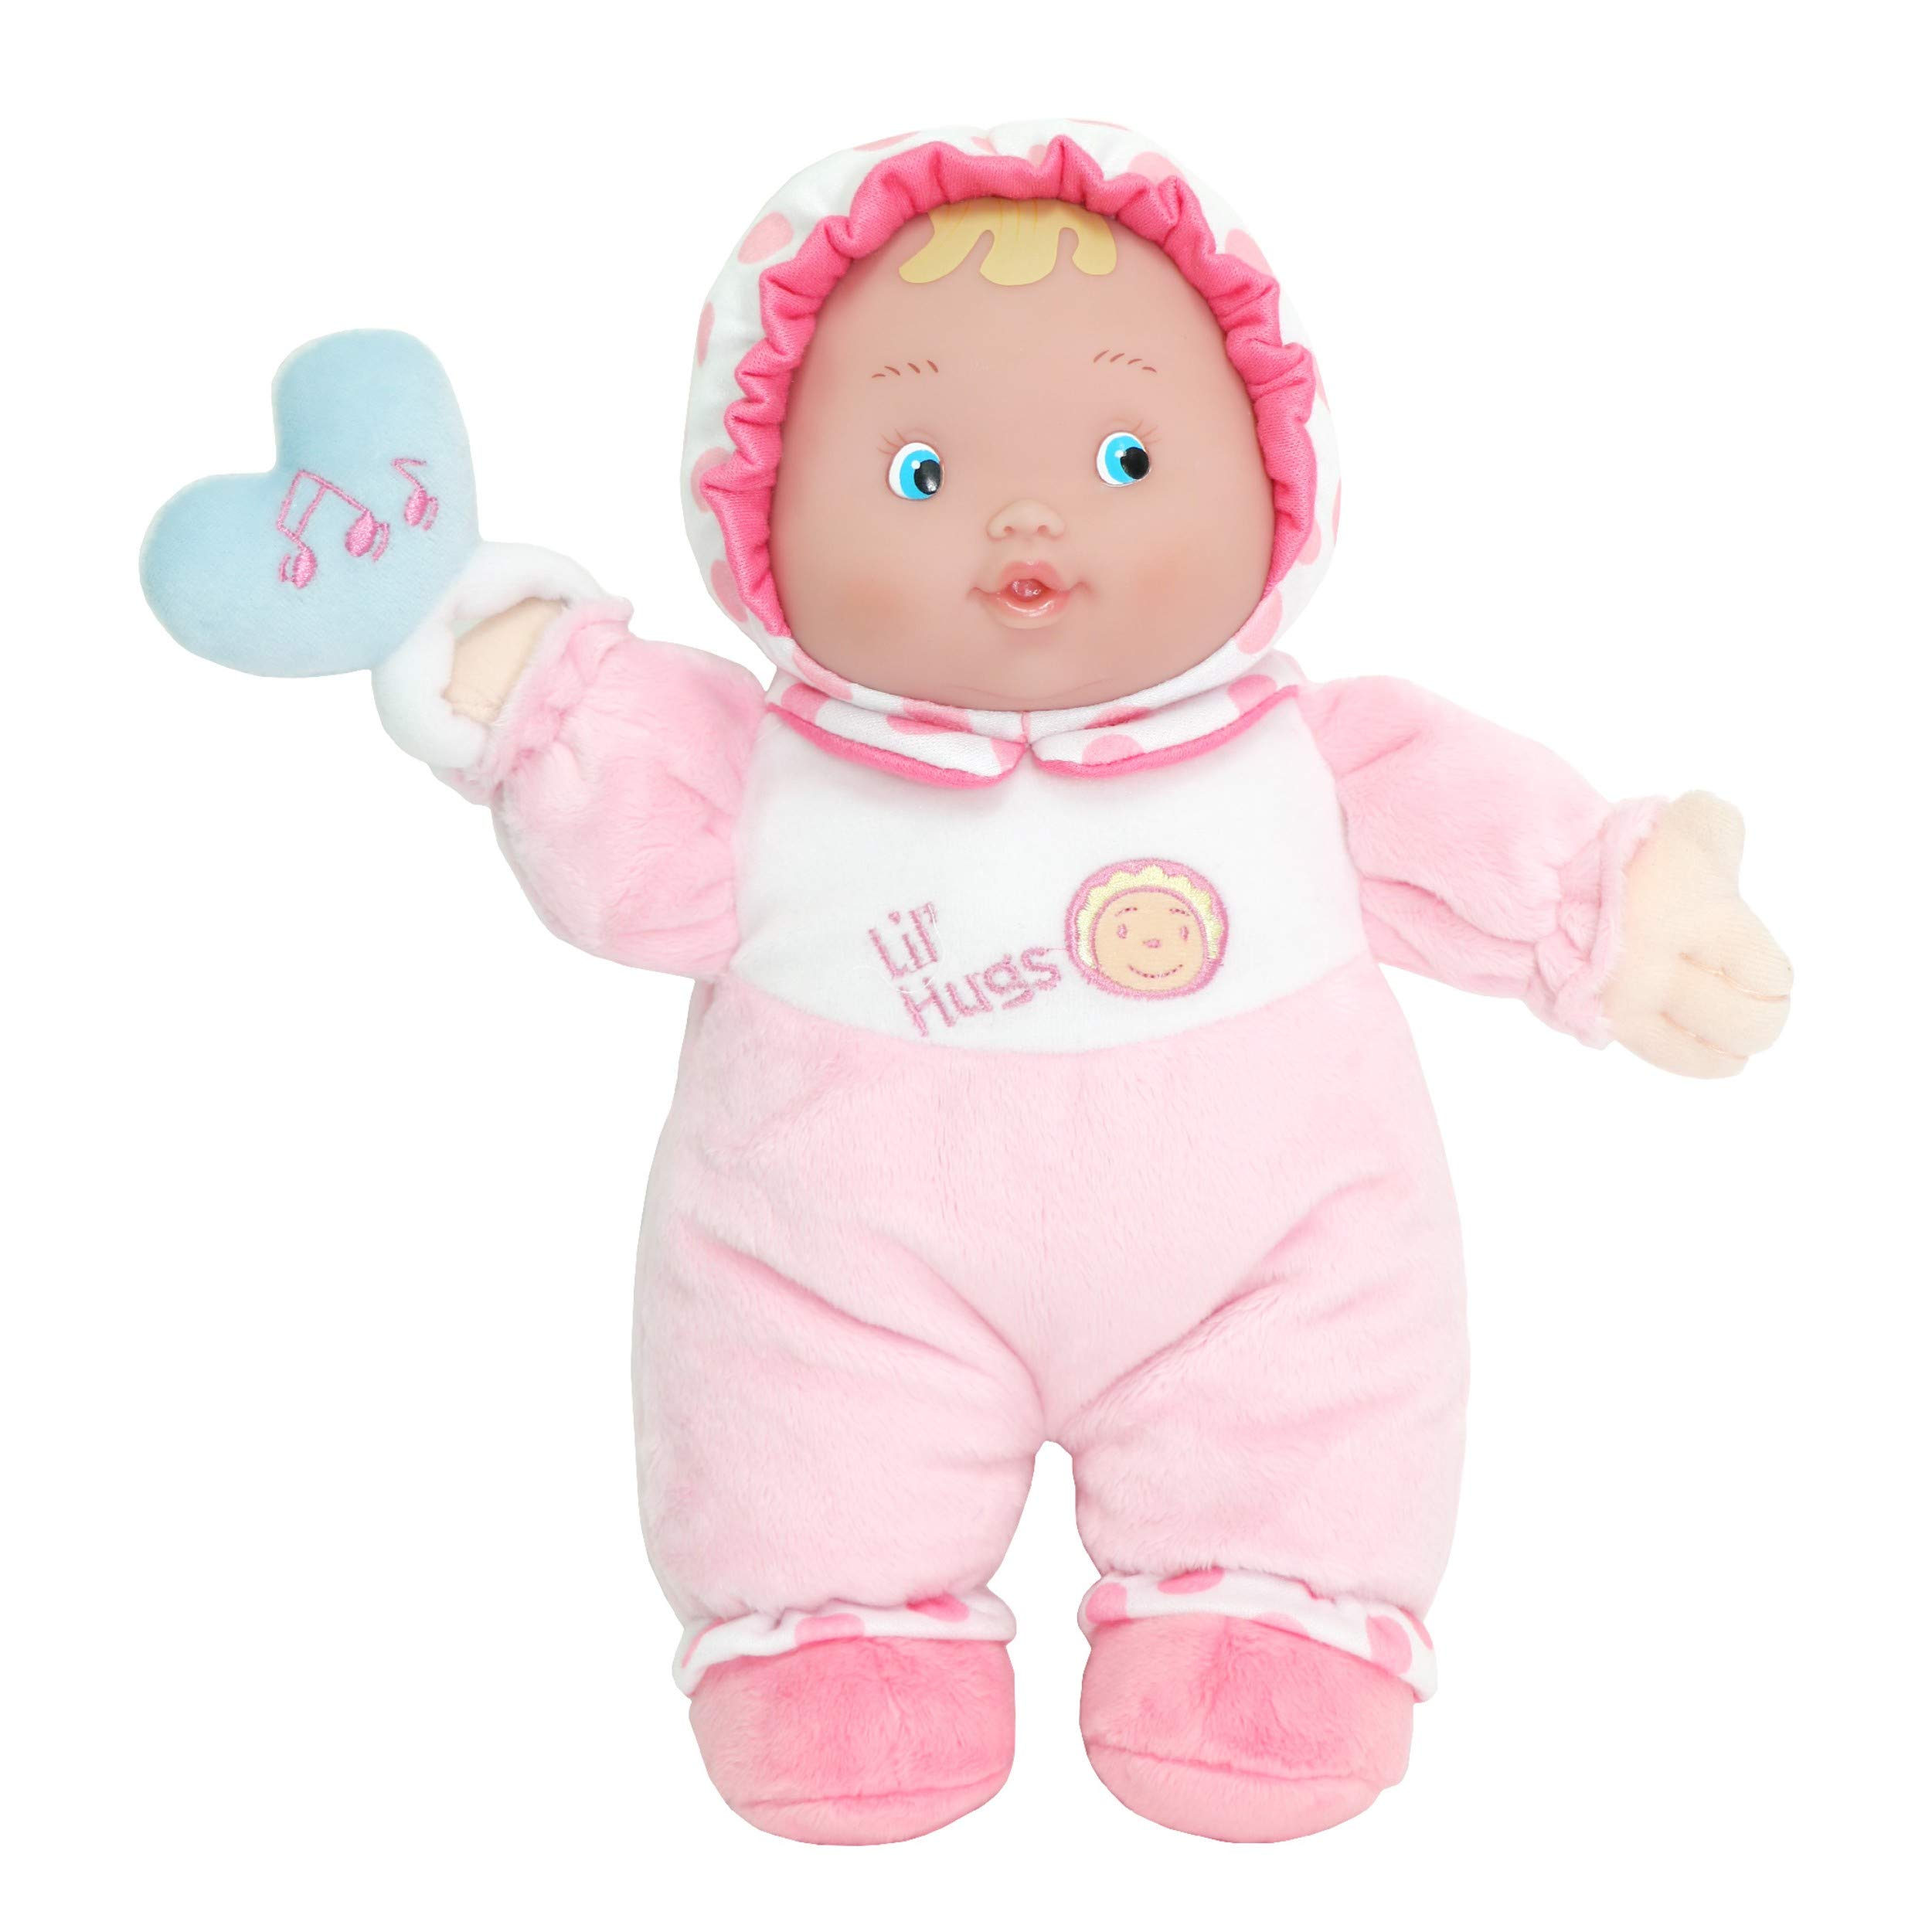 JC Toys Lil’ Hugs Pink Soft Body - Your First Baby Doll – Designed by Berenguer – Ages 0+, 12 inches